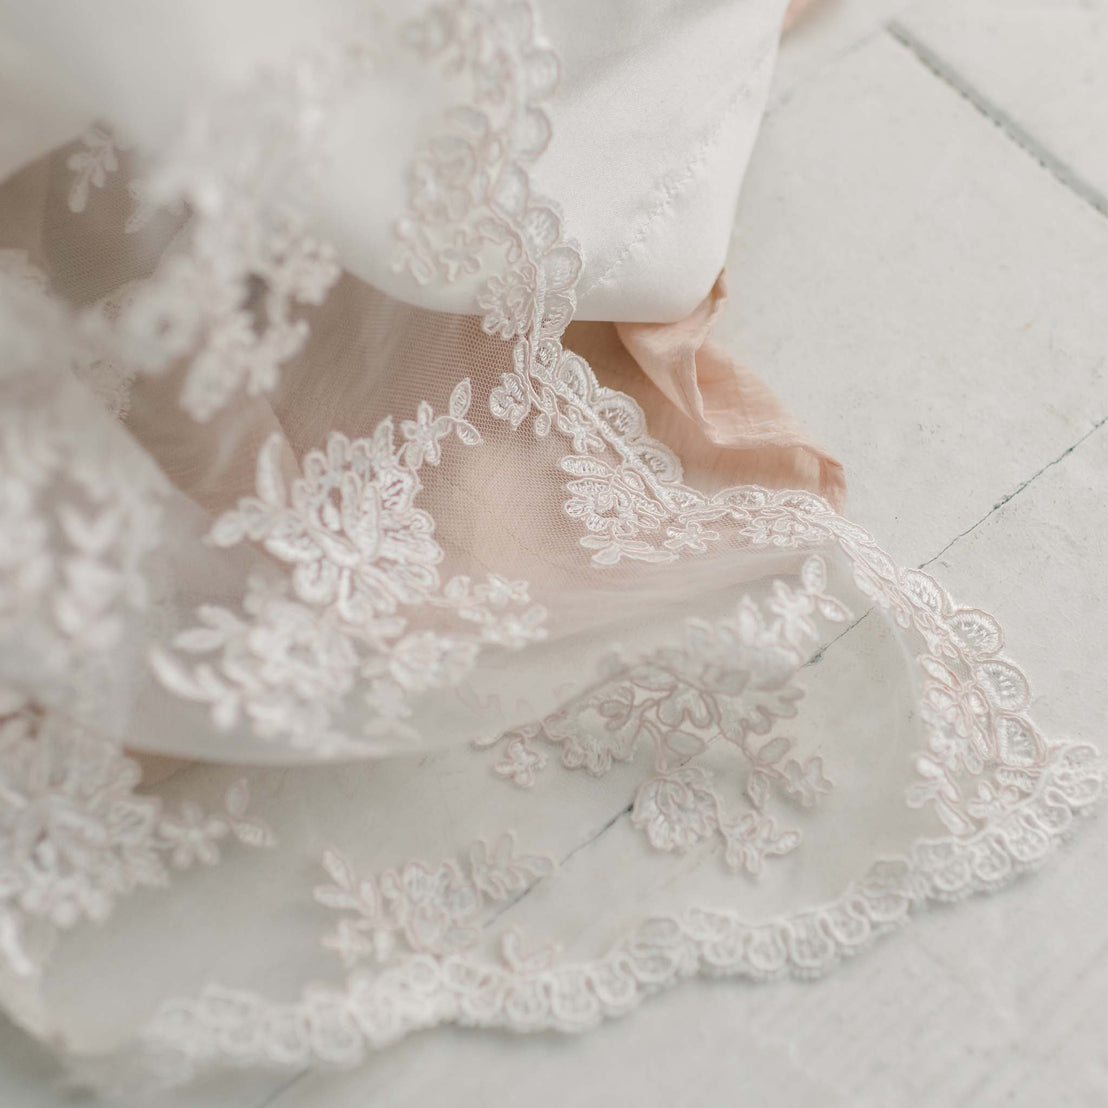 Ivory embroidered lace detail on traditional style baby gown for christening